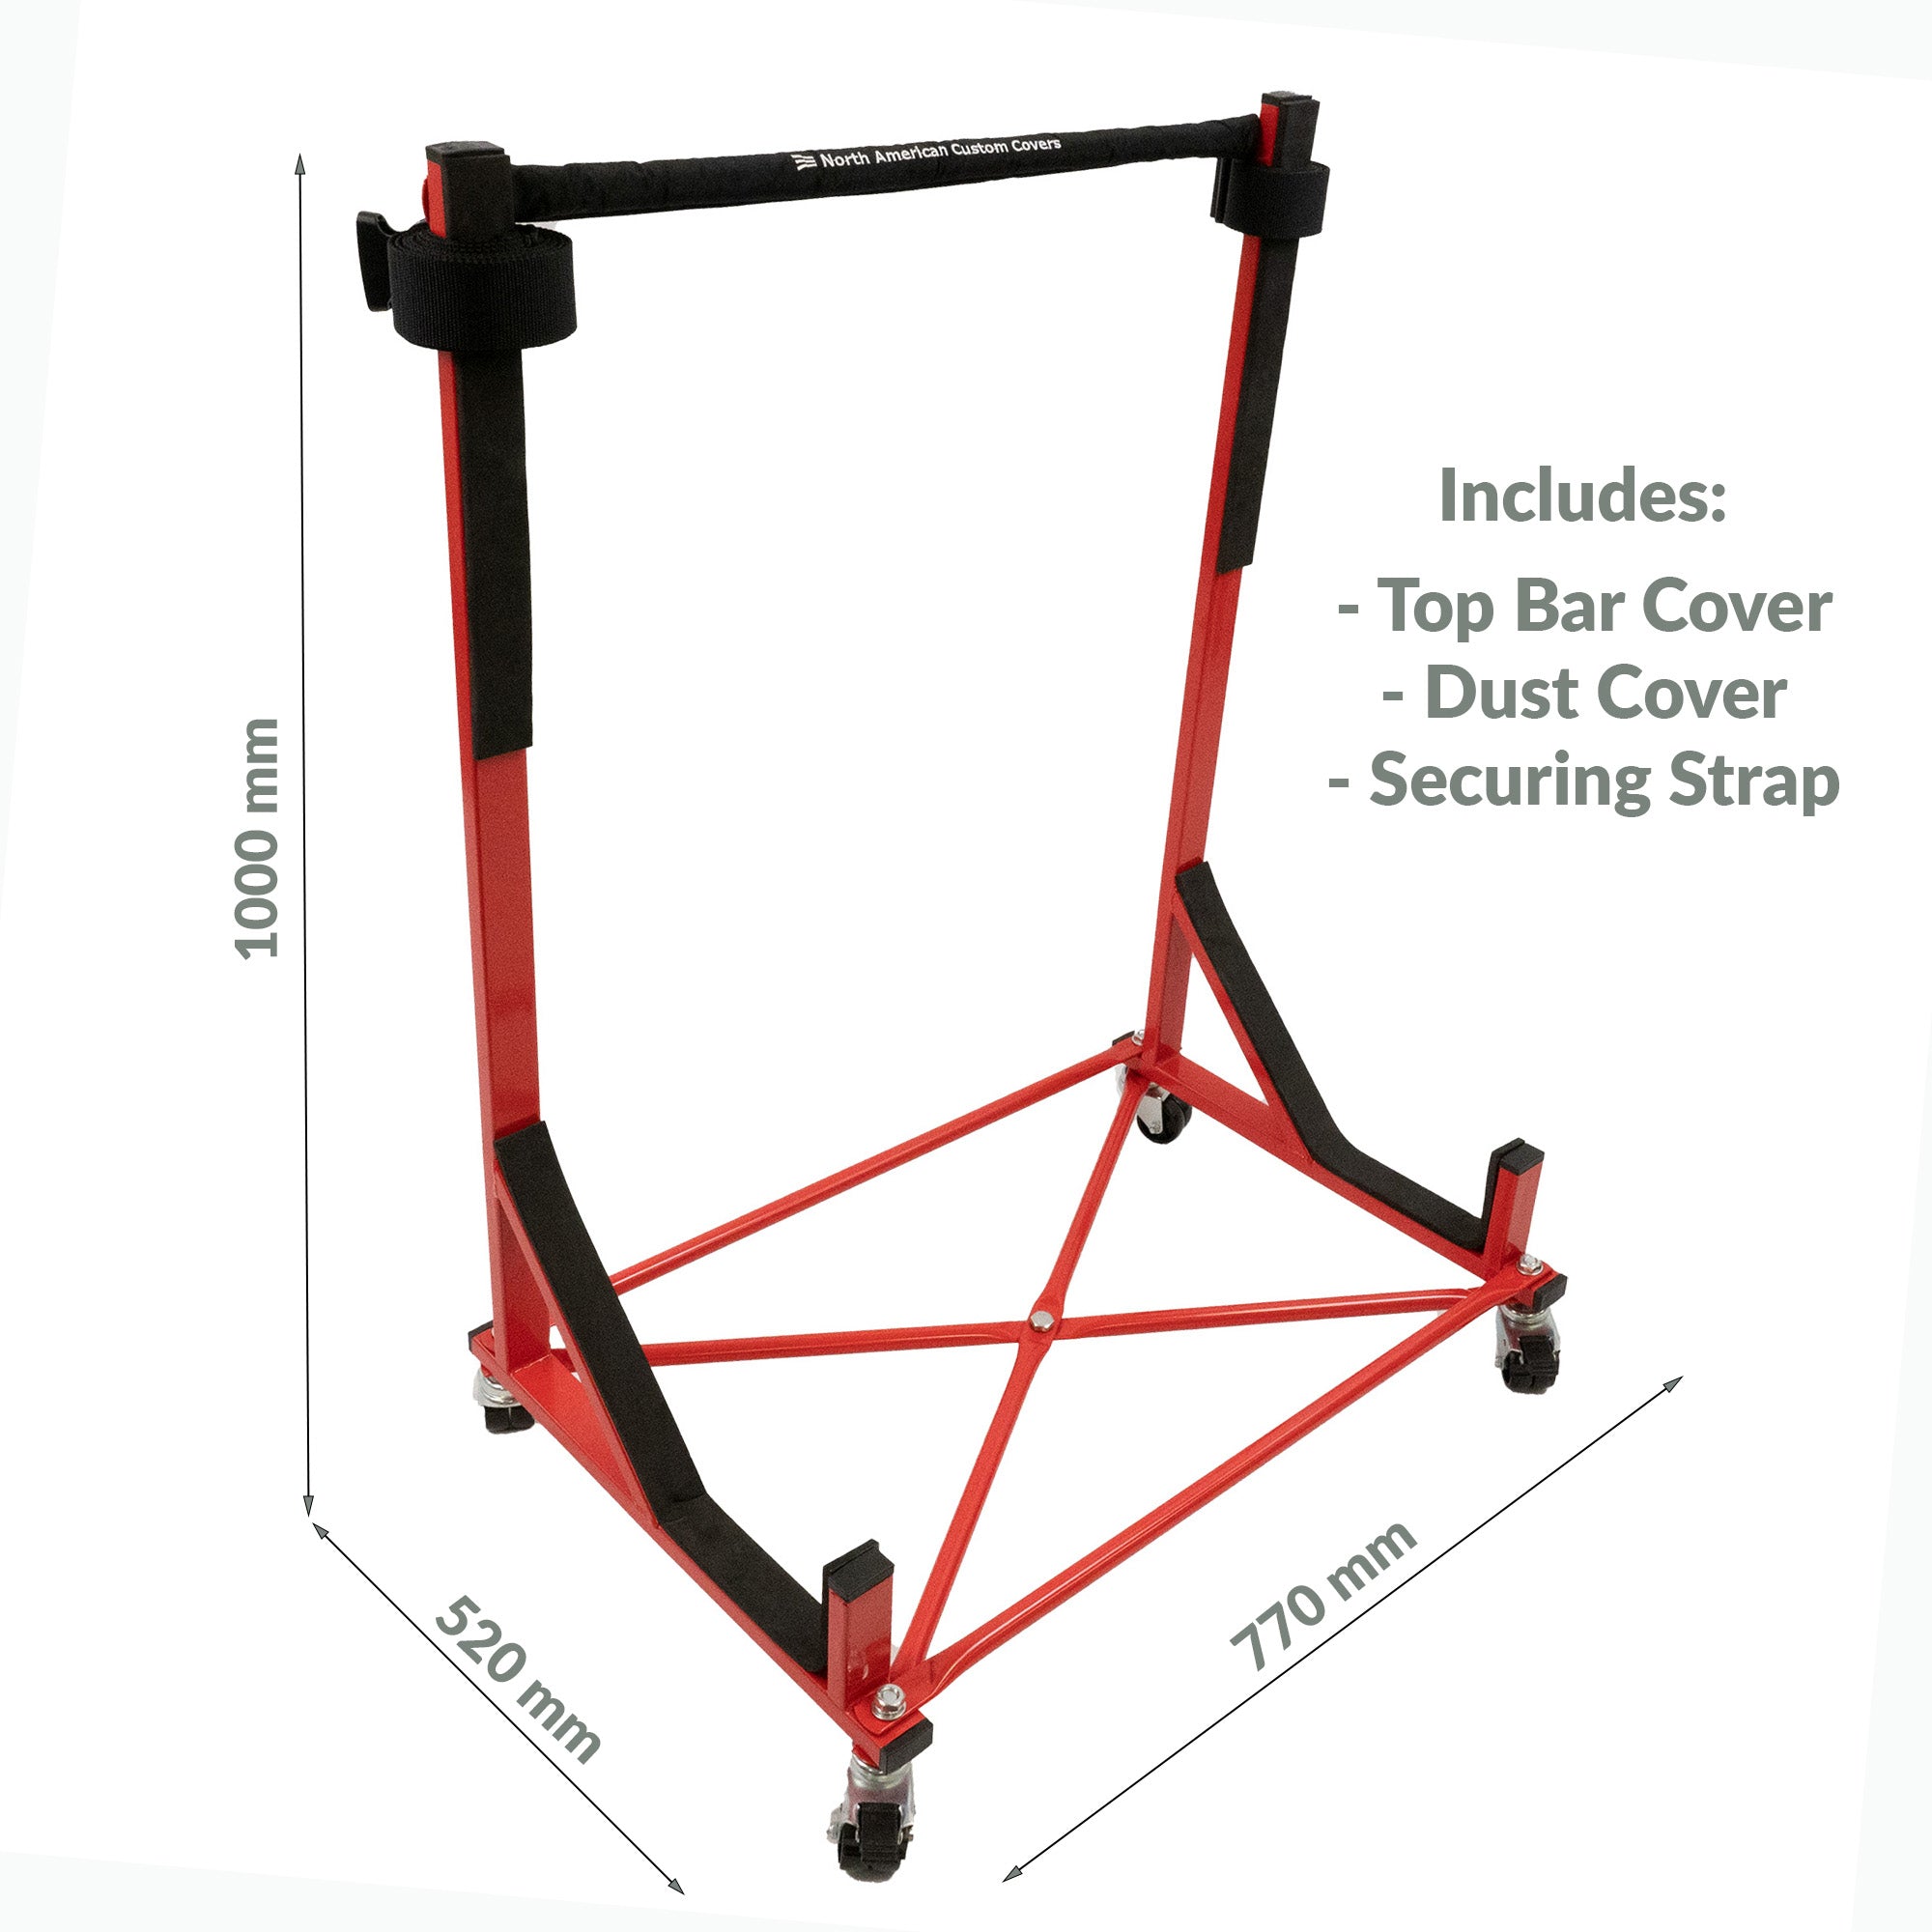 Sunbeam Tiger Heavy-duty Hardtop Stand Trolley Cart Rack (Red) with Securing Harness and Hard Top Dust Cover (050R)